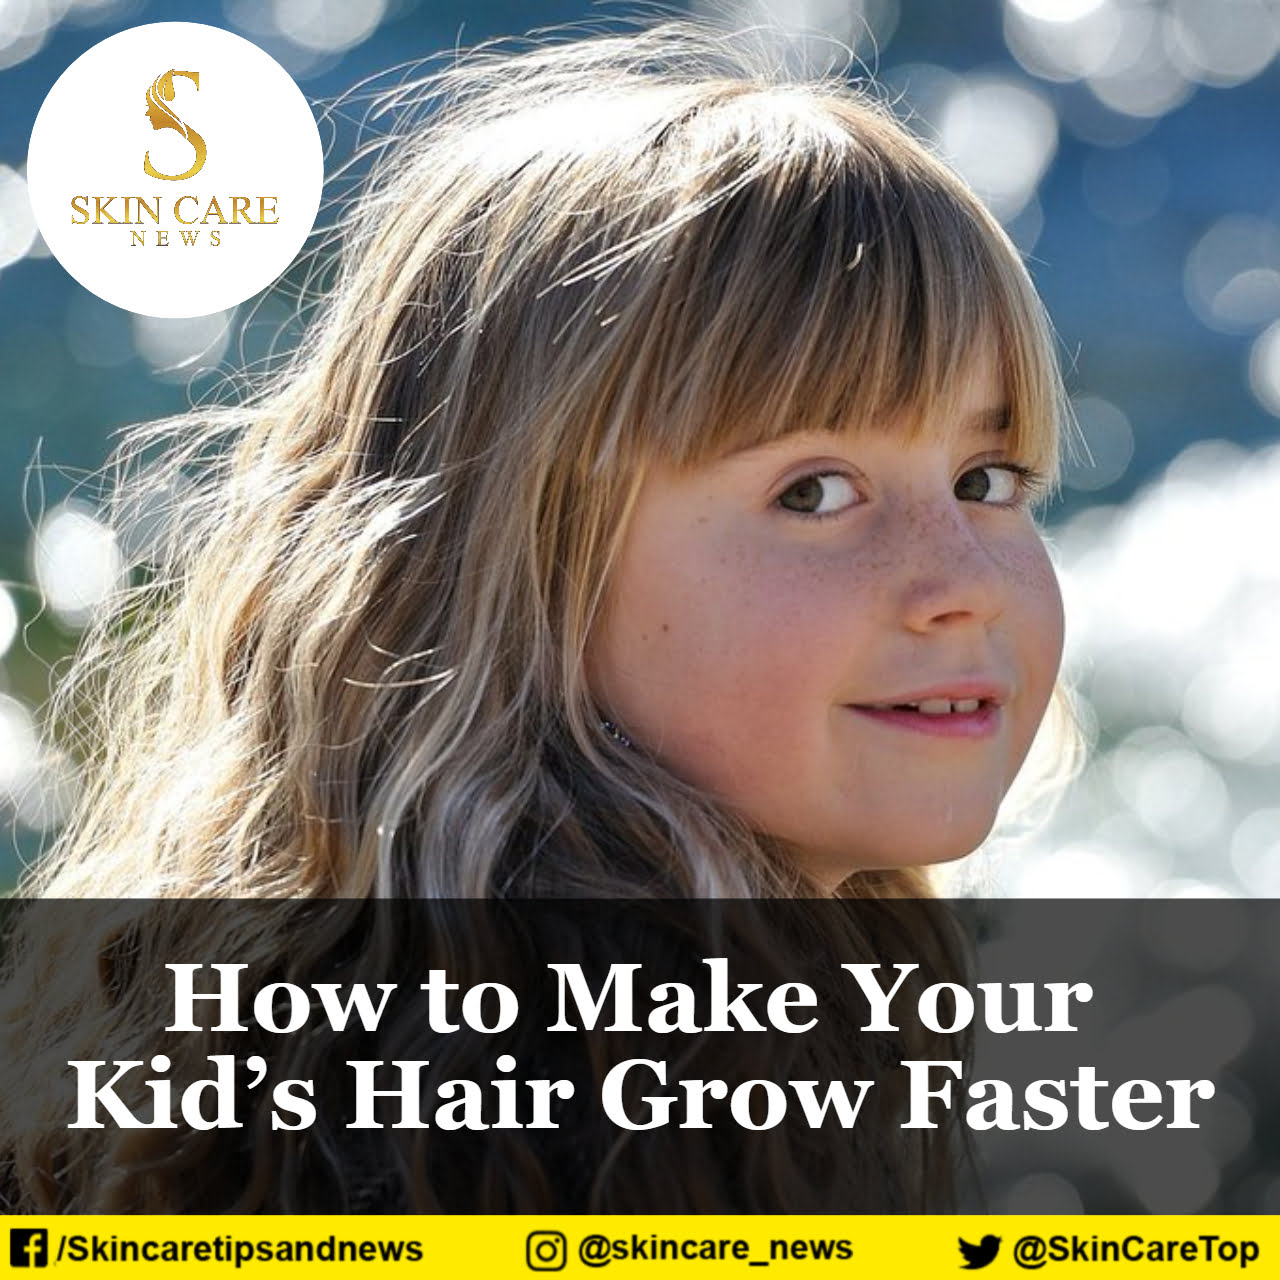 How to Make Your Kid's Hair Grow Faster